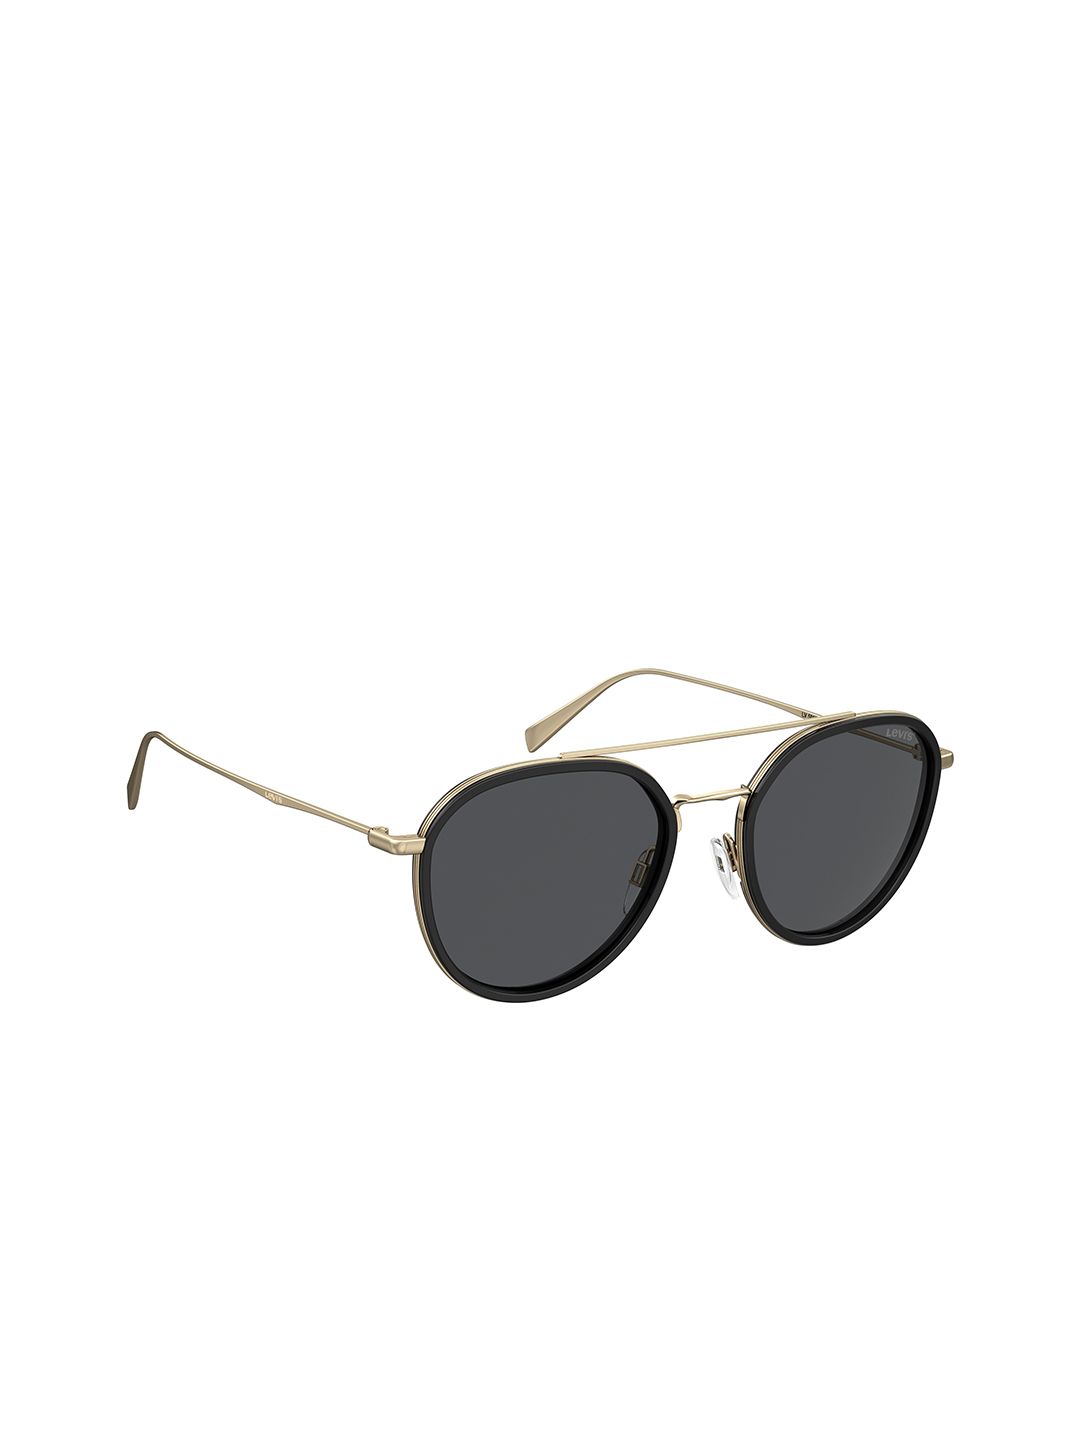 Levis Unisex Grey Lens & Black Round Sunglasses with UV Protected Lens LV 5010/S 807 54IR Price in India